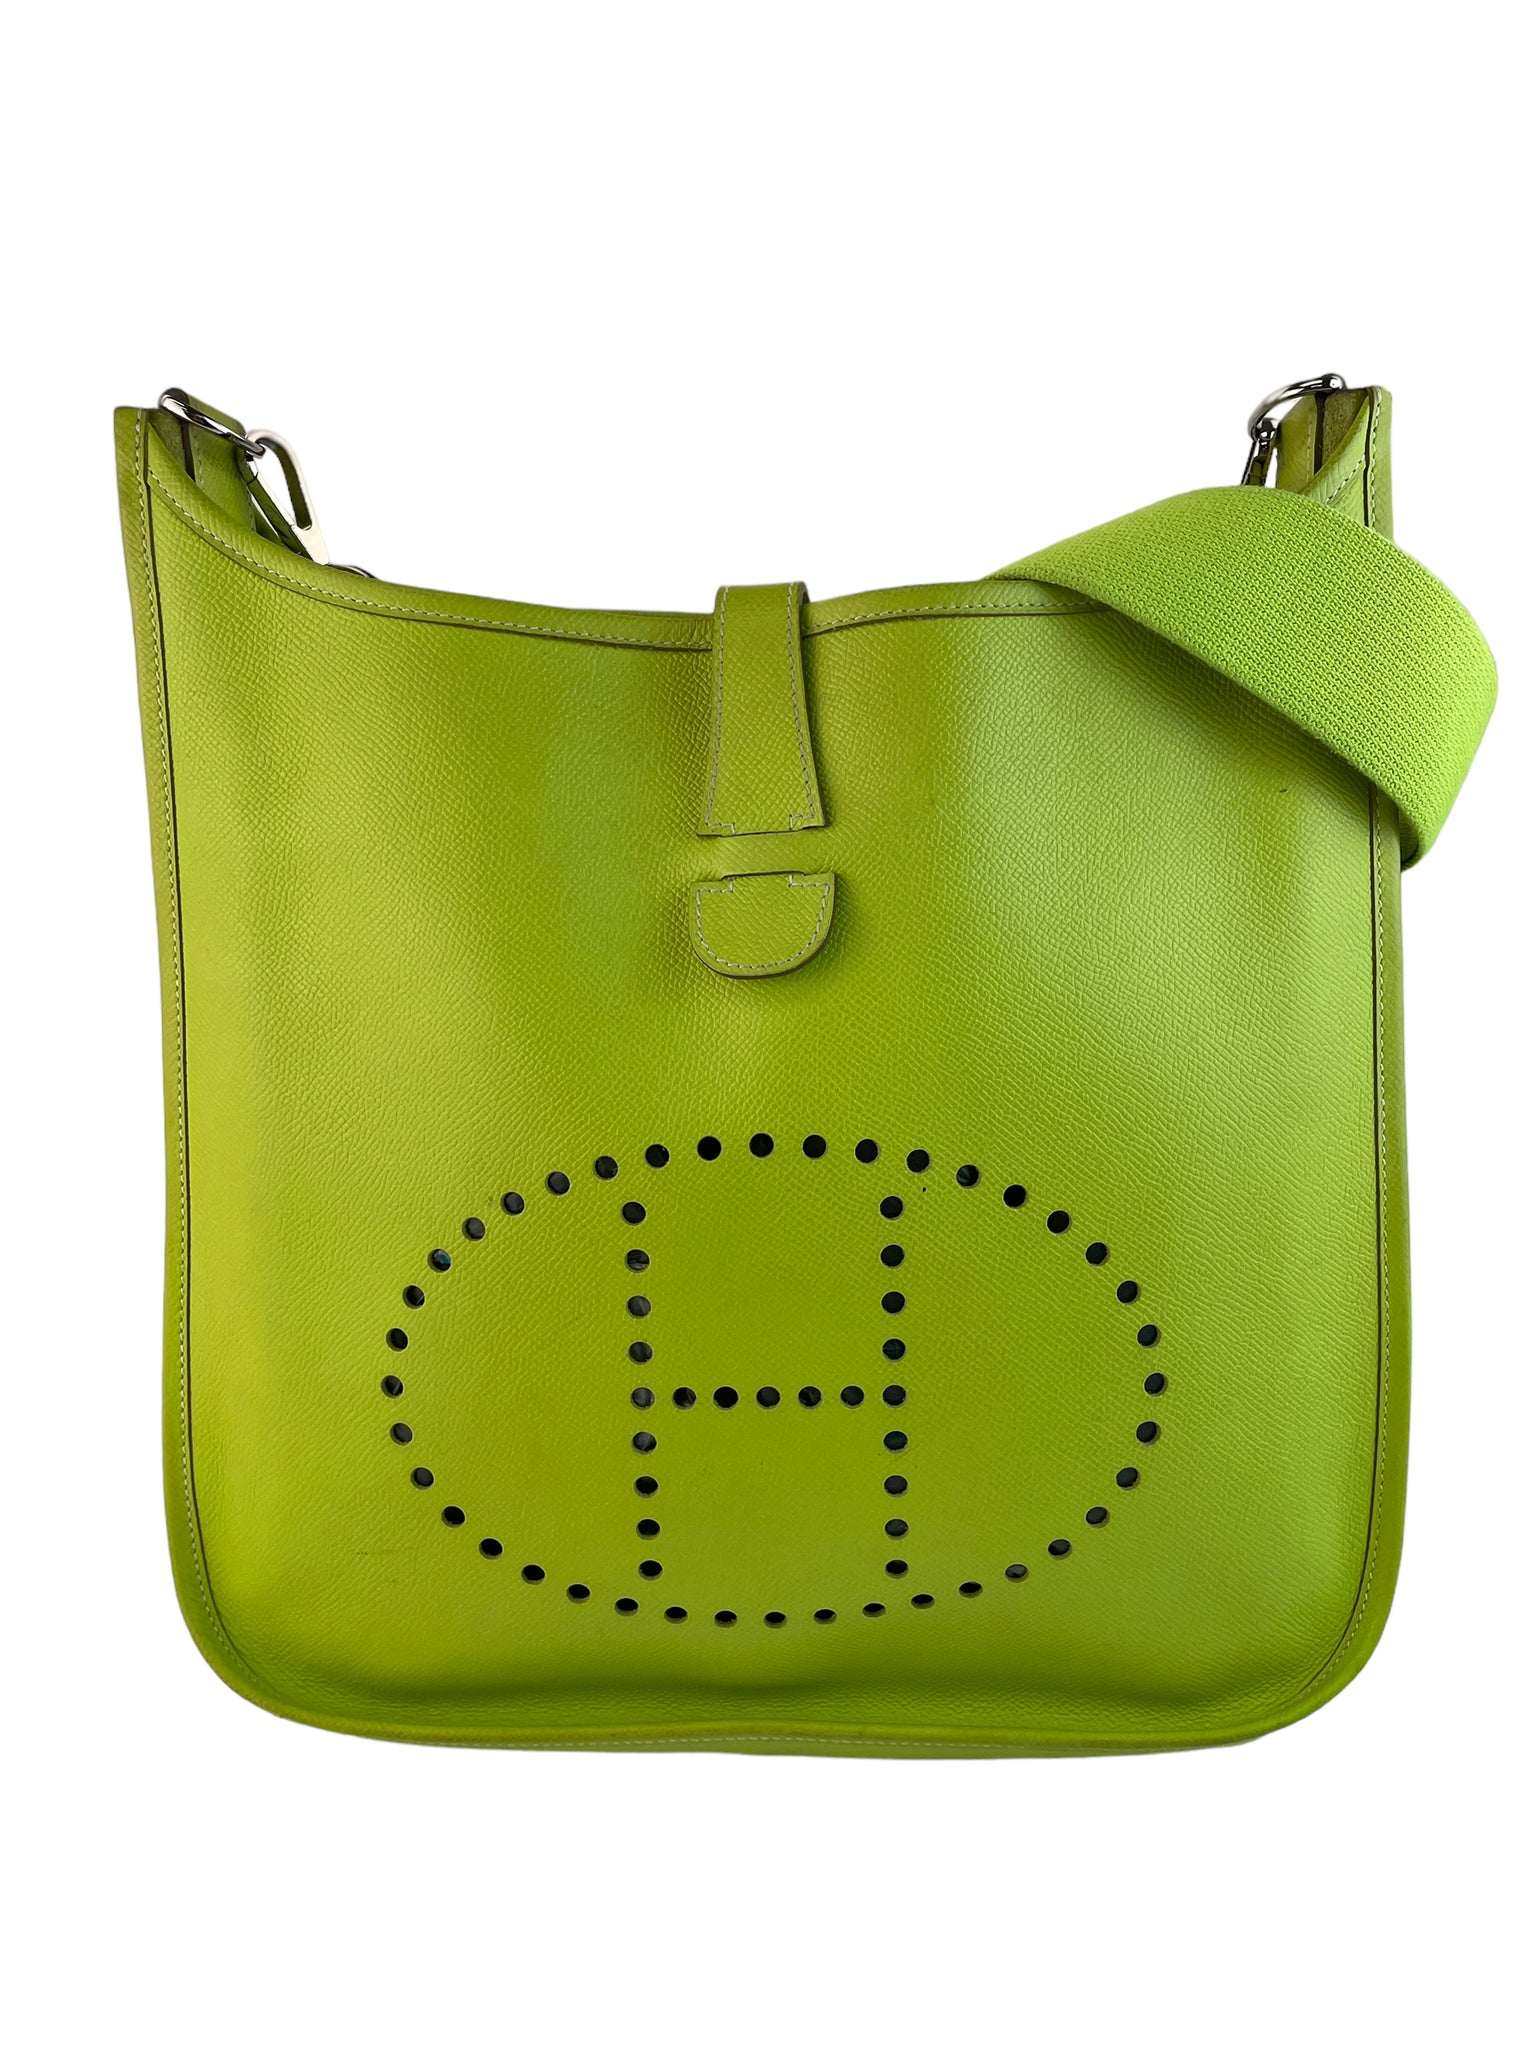 Replica Hermes Evelyne III TPM Bag In Yellow Clemence Leather